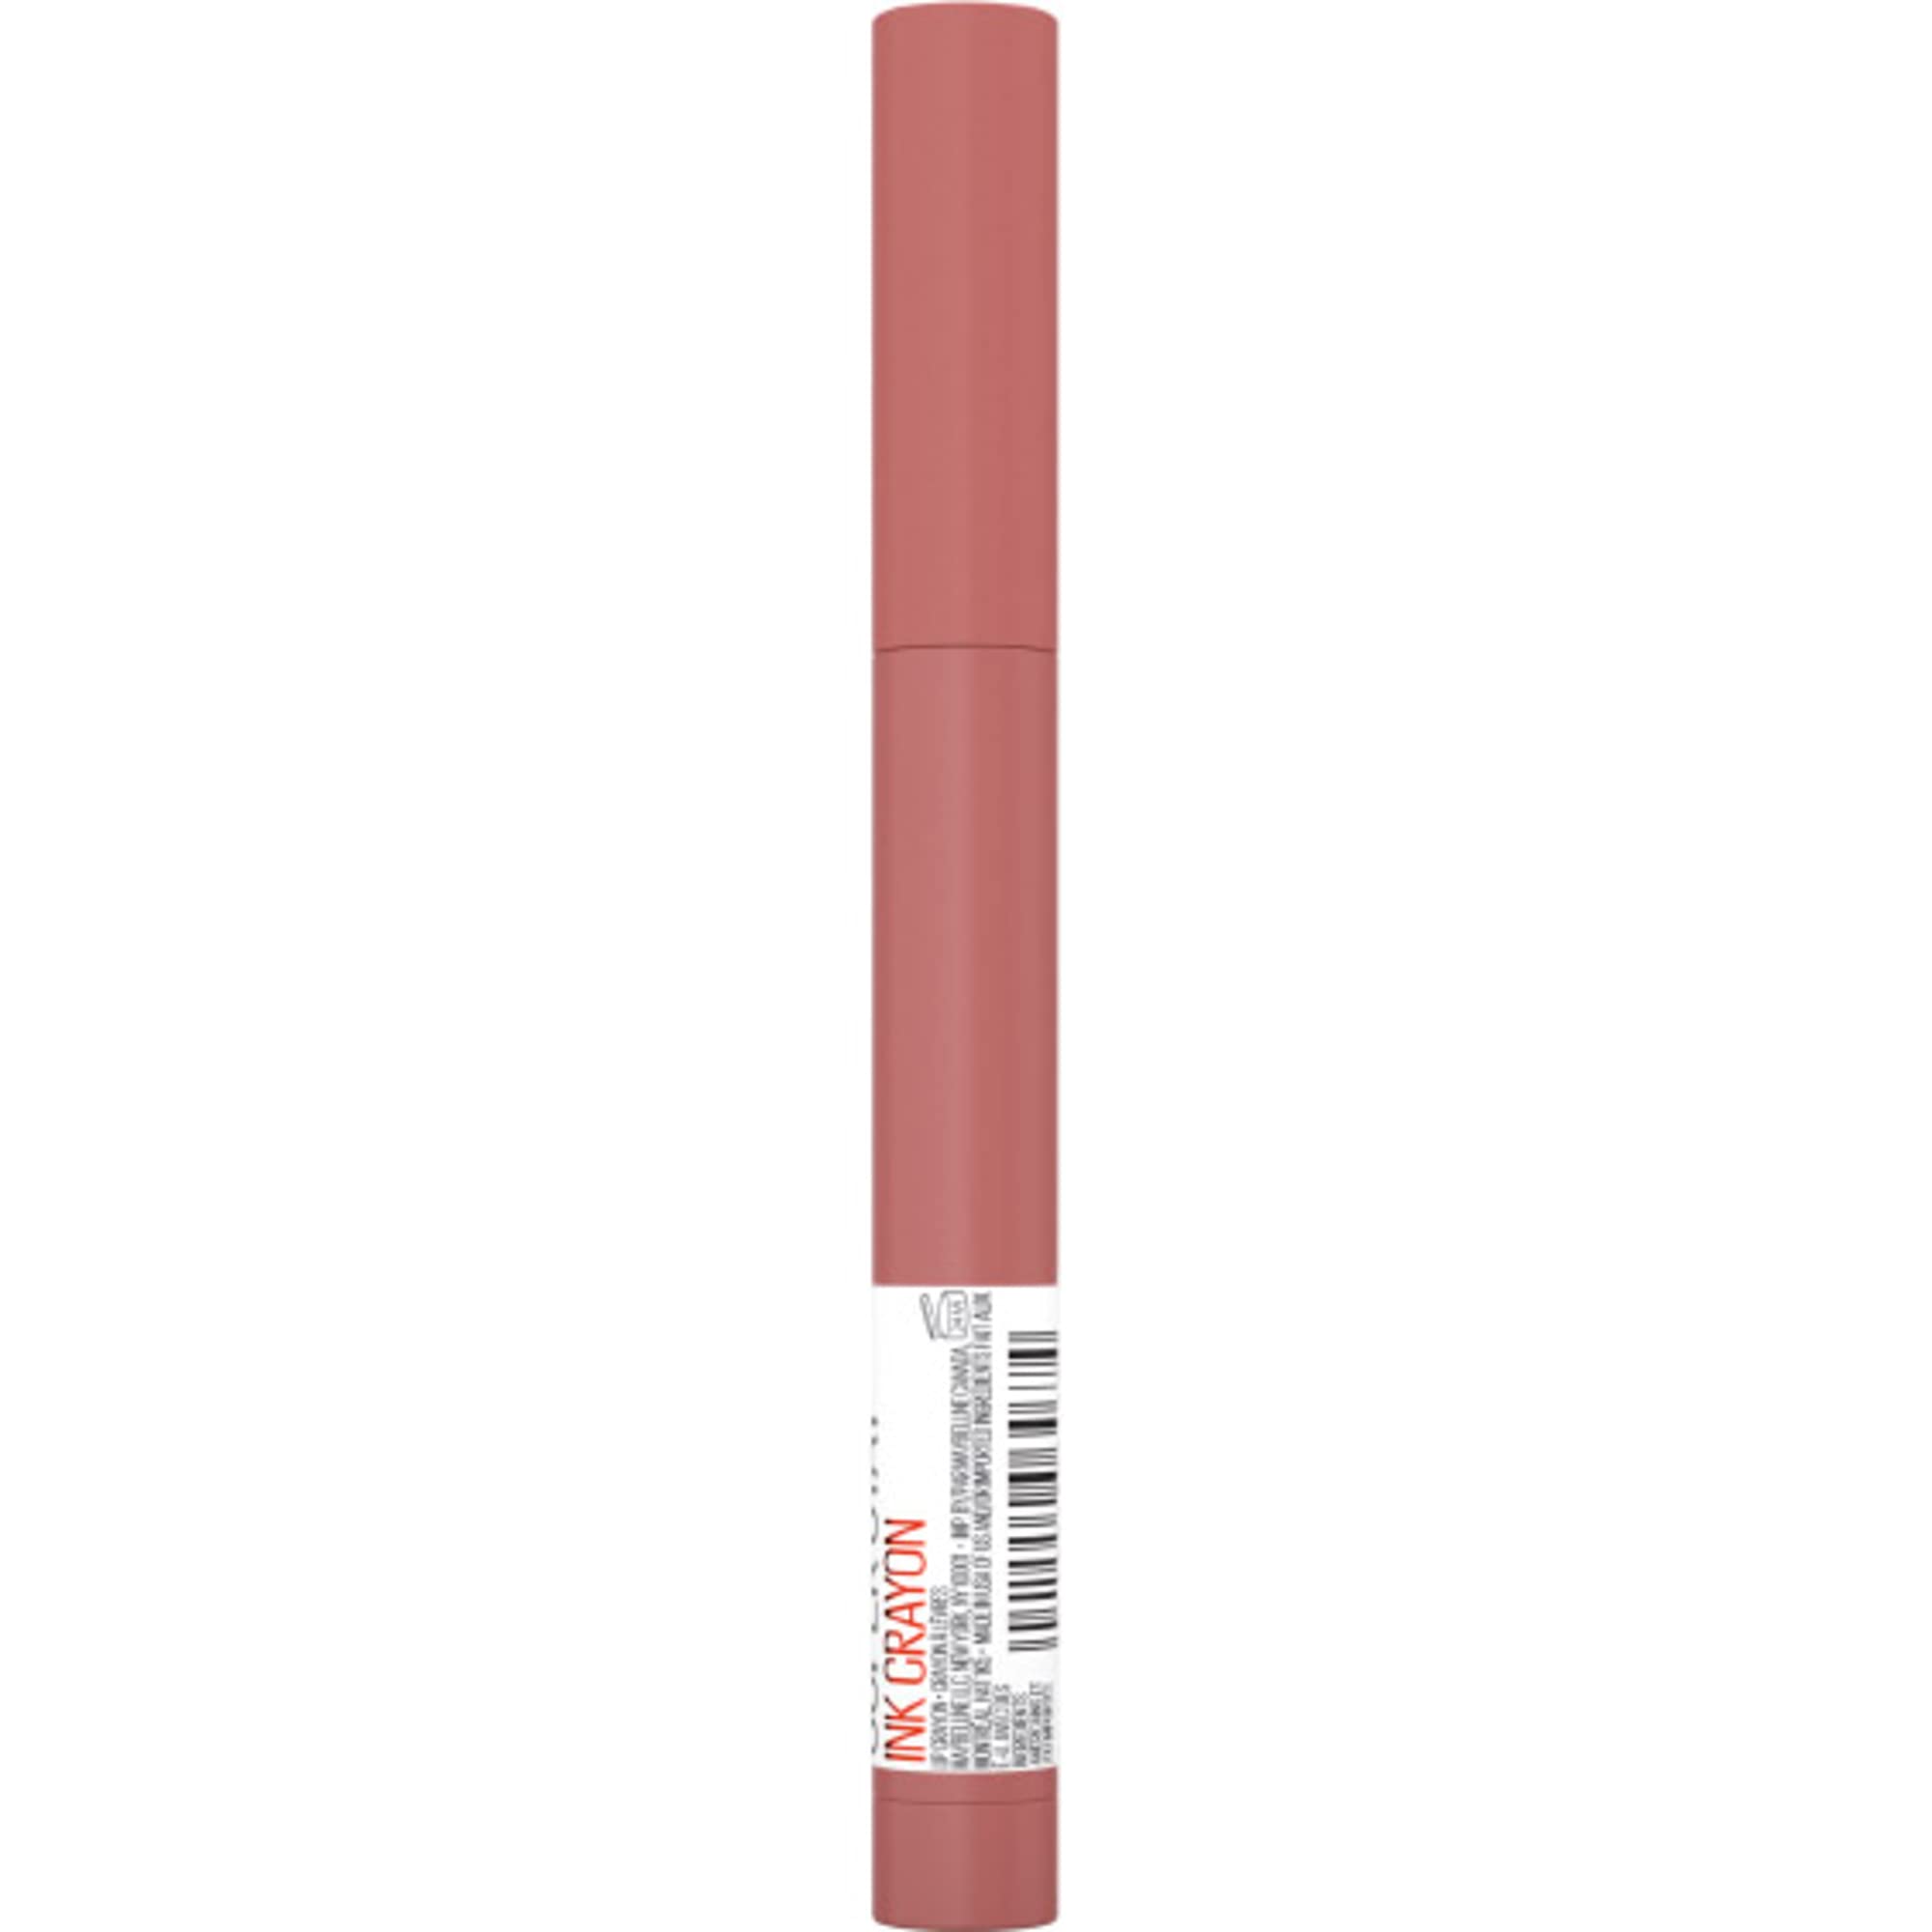 MAYBELLINE New York Super Stay Ink Crayon Lipstick Makeup, Precision Tip Matte Lip Crayon with Built-in Sharpener, Longwear Up To 8Hrs, Achieve It All, Brown Nude, 1 Count